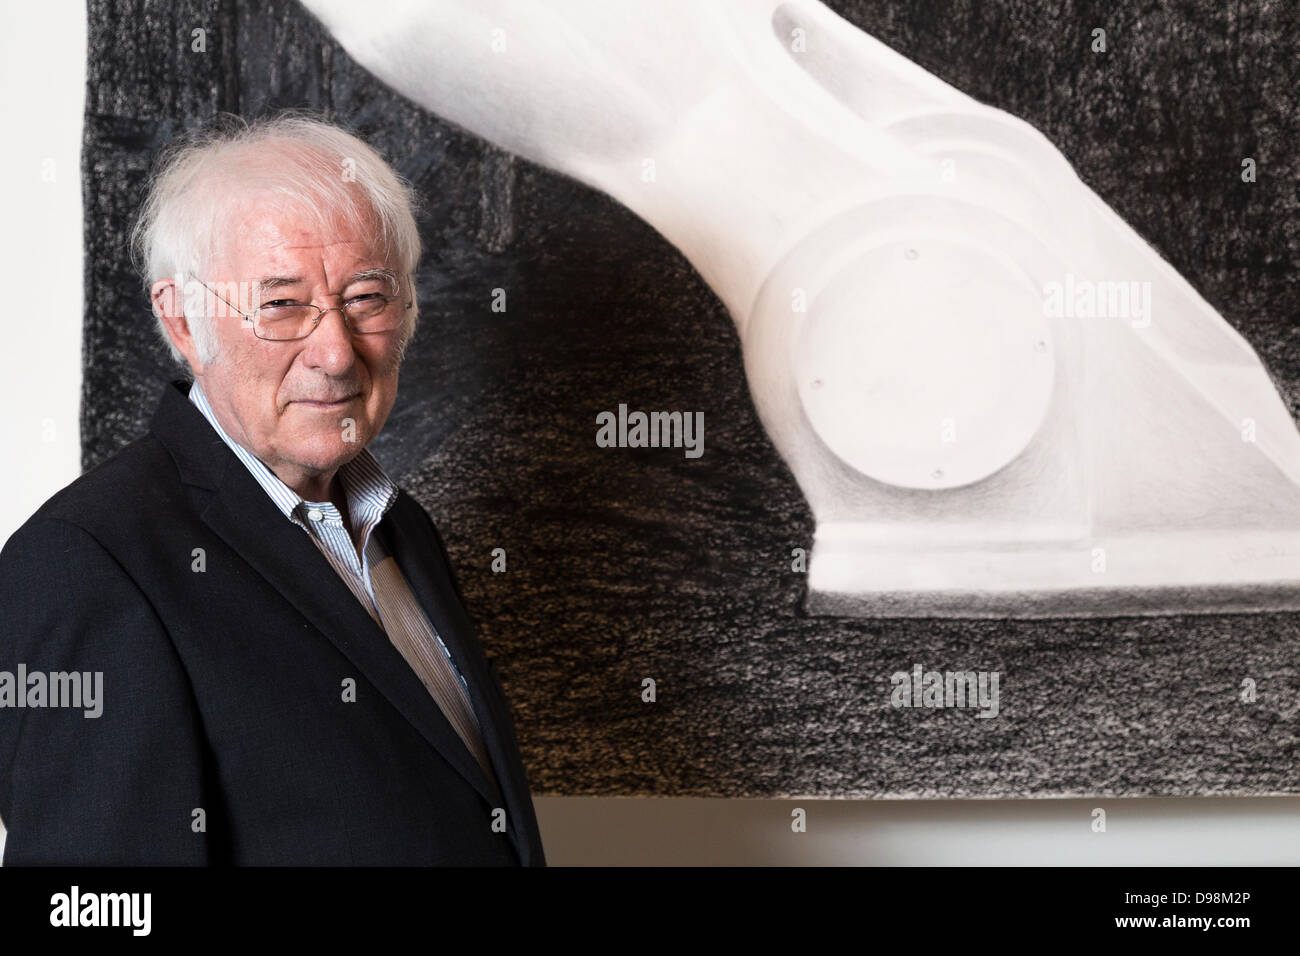 13 June 2013. Paris, France. Nobel laureate and poet, Seamus Heaney, with artwork by Irish artist, Vivienne Roche, at the Irish Cultural Centre (Centre Culturel Irlandais), for the event: Special Evening with Seamus Heaney, held in conjunction with the Marché de la Poésie. Also in attendance were the Irish Minister for Arts, Heritage and the Gaeltacht, Jimmy Deenihan, the Irish to France, Paul Kavanagh and Irish Cultural Centre Director, Sheila Pratschke. Guests met in the Centre gallery, which is currently honouring the work of Irish engineer Peter Rice. Credit:  Christine Gates/Alamy Live Ne Stock Photo